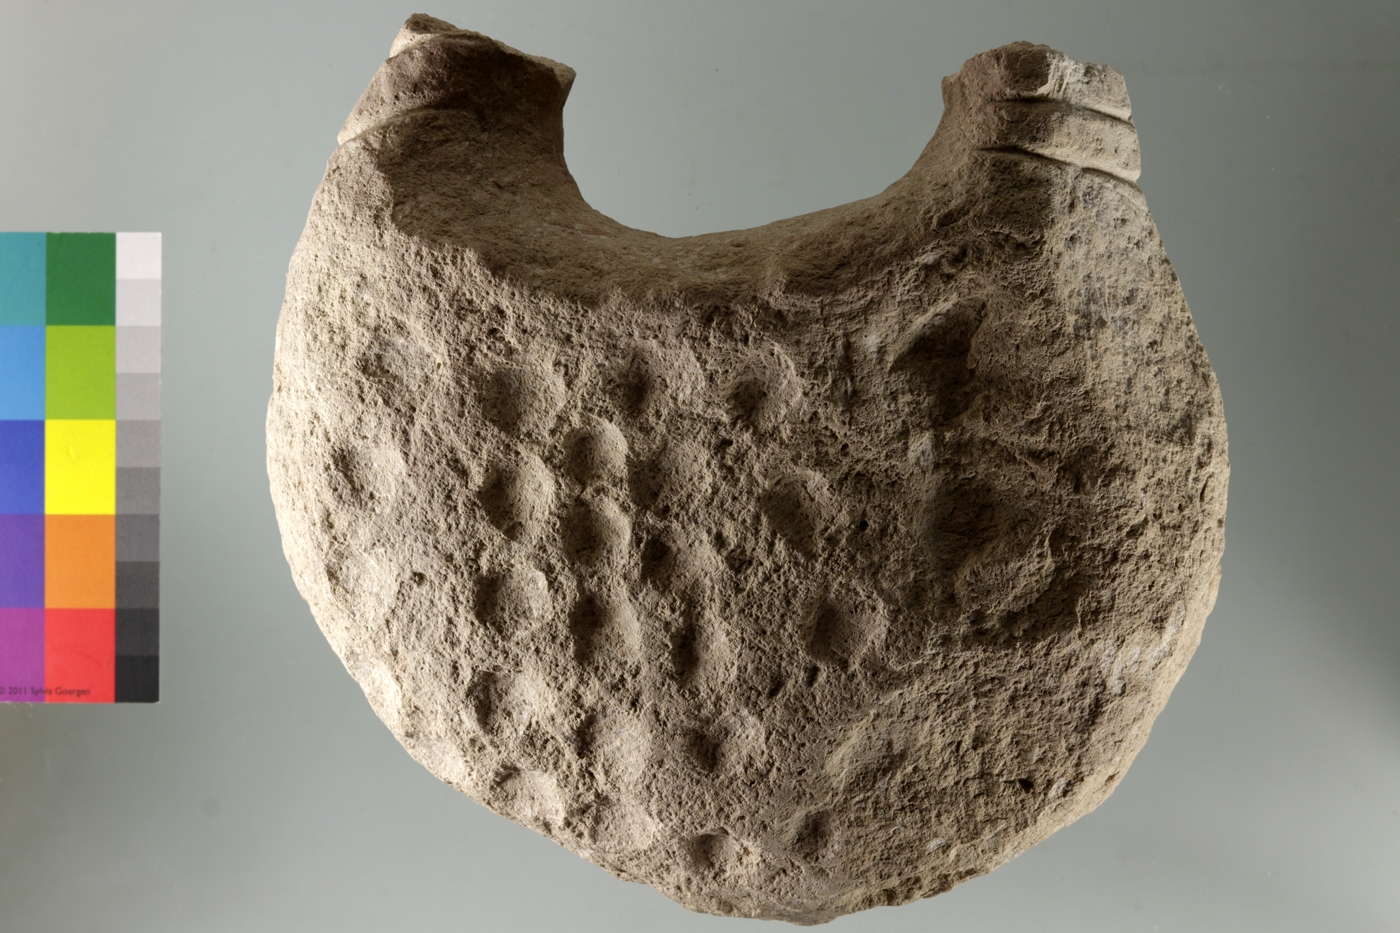 Unusual “handbag”-shaped stone object. The “handles” are broken on both ends, the body of the object is covered with round depressions. Perhaps a weight.